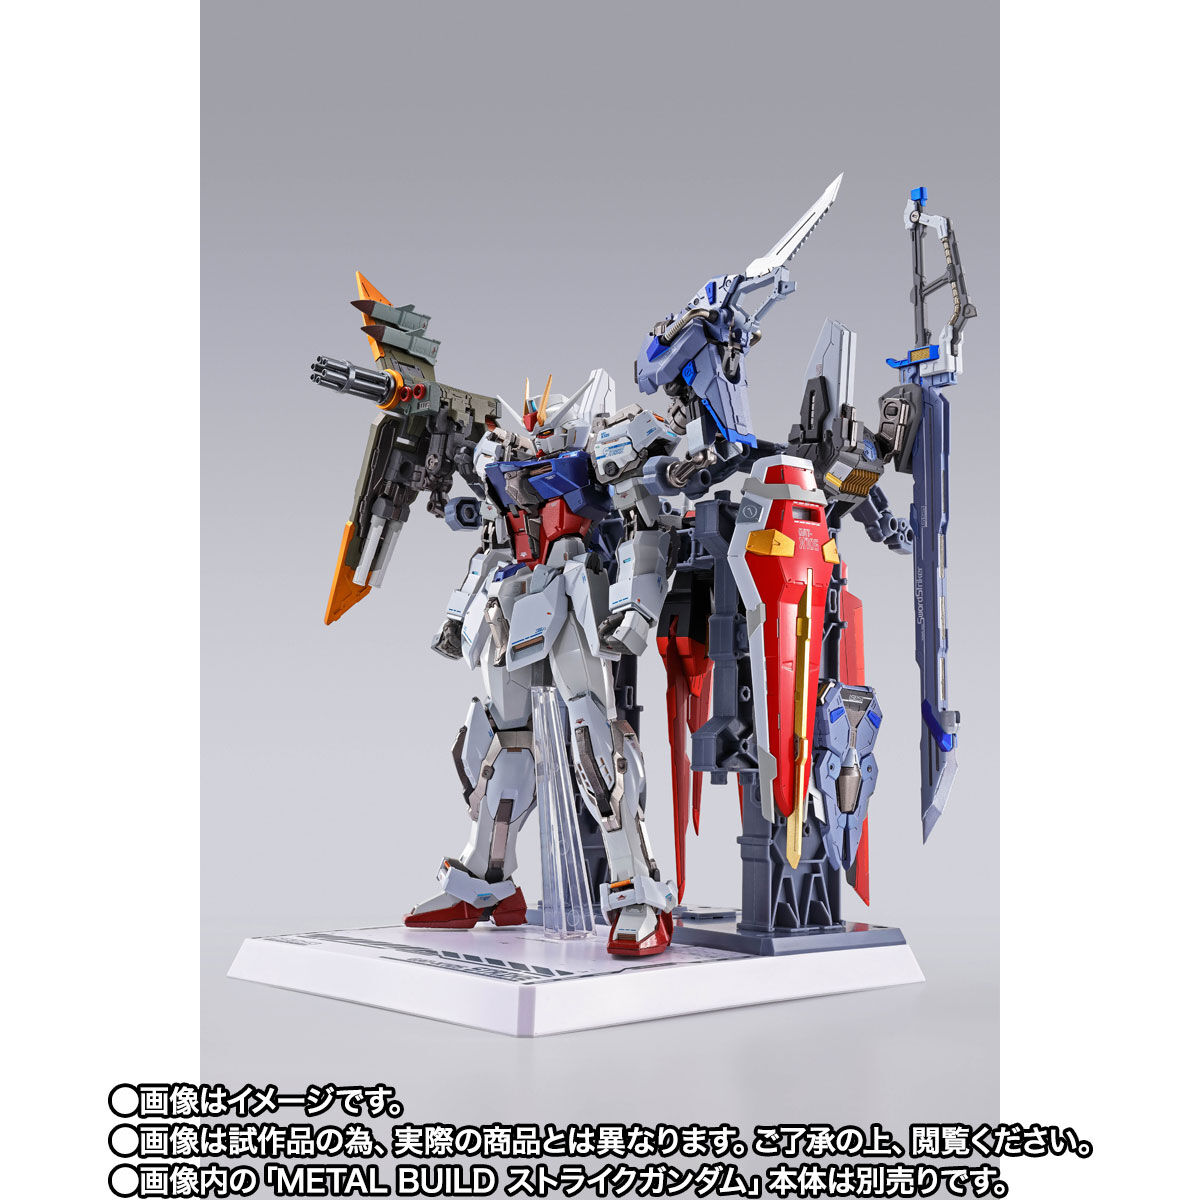 Metal Build AQM/E-X02 Sword Striker for Gundam Seed Series(Metal Build 10th Anniversary Limited Package)